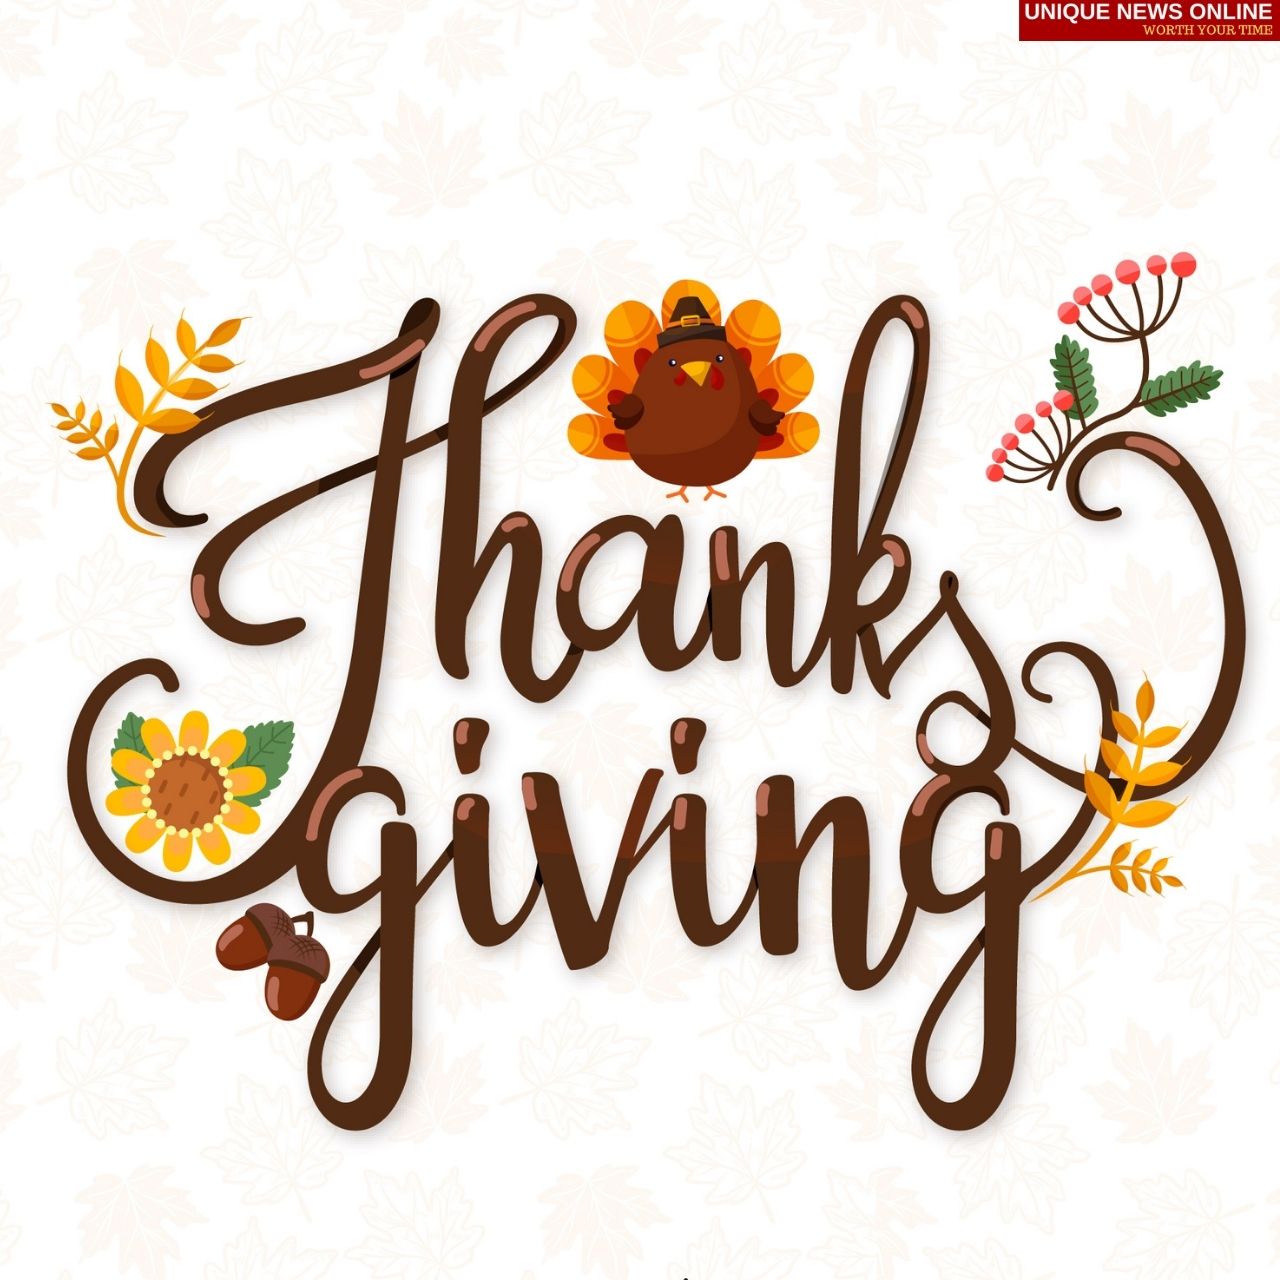 Thanksgiving 2021 Wishes, Sayings, Quotes, HD Images, Messages, and Greetings to Share